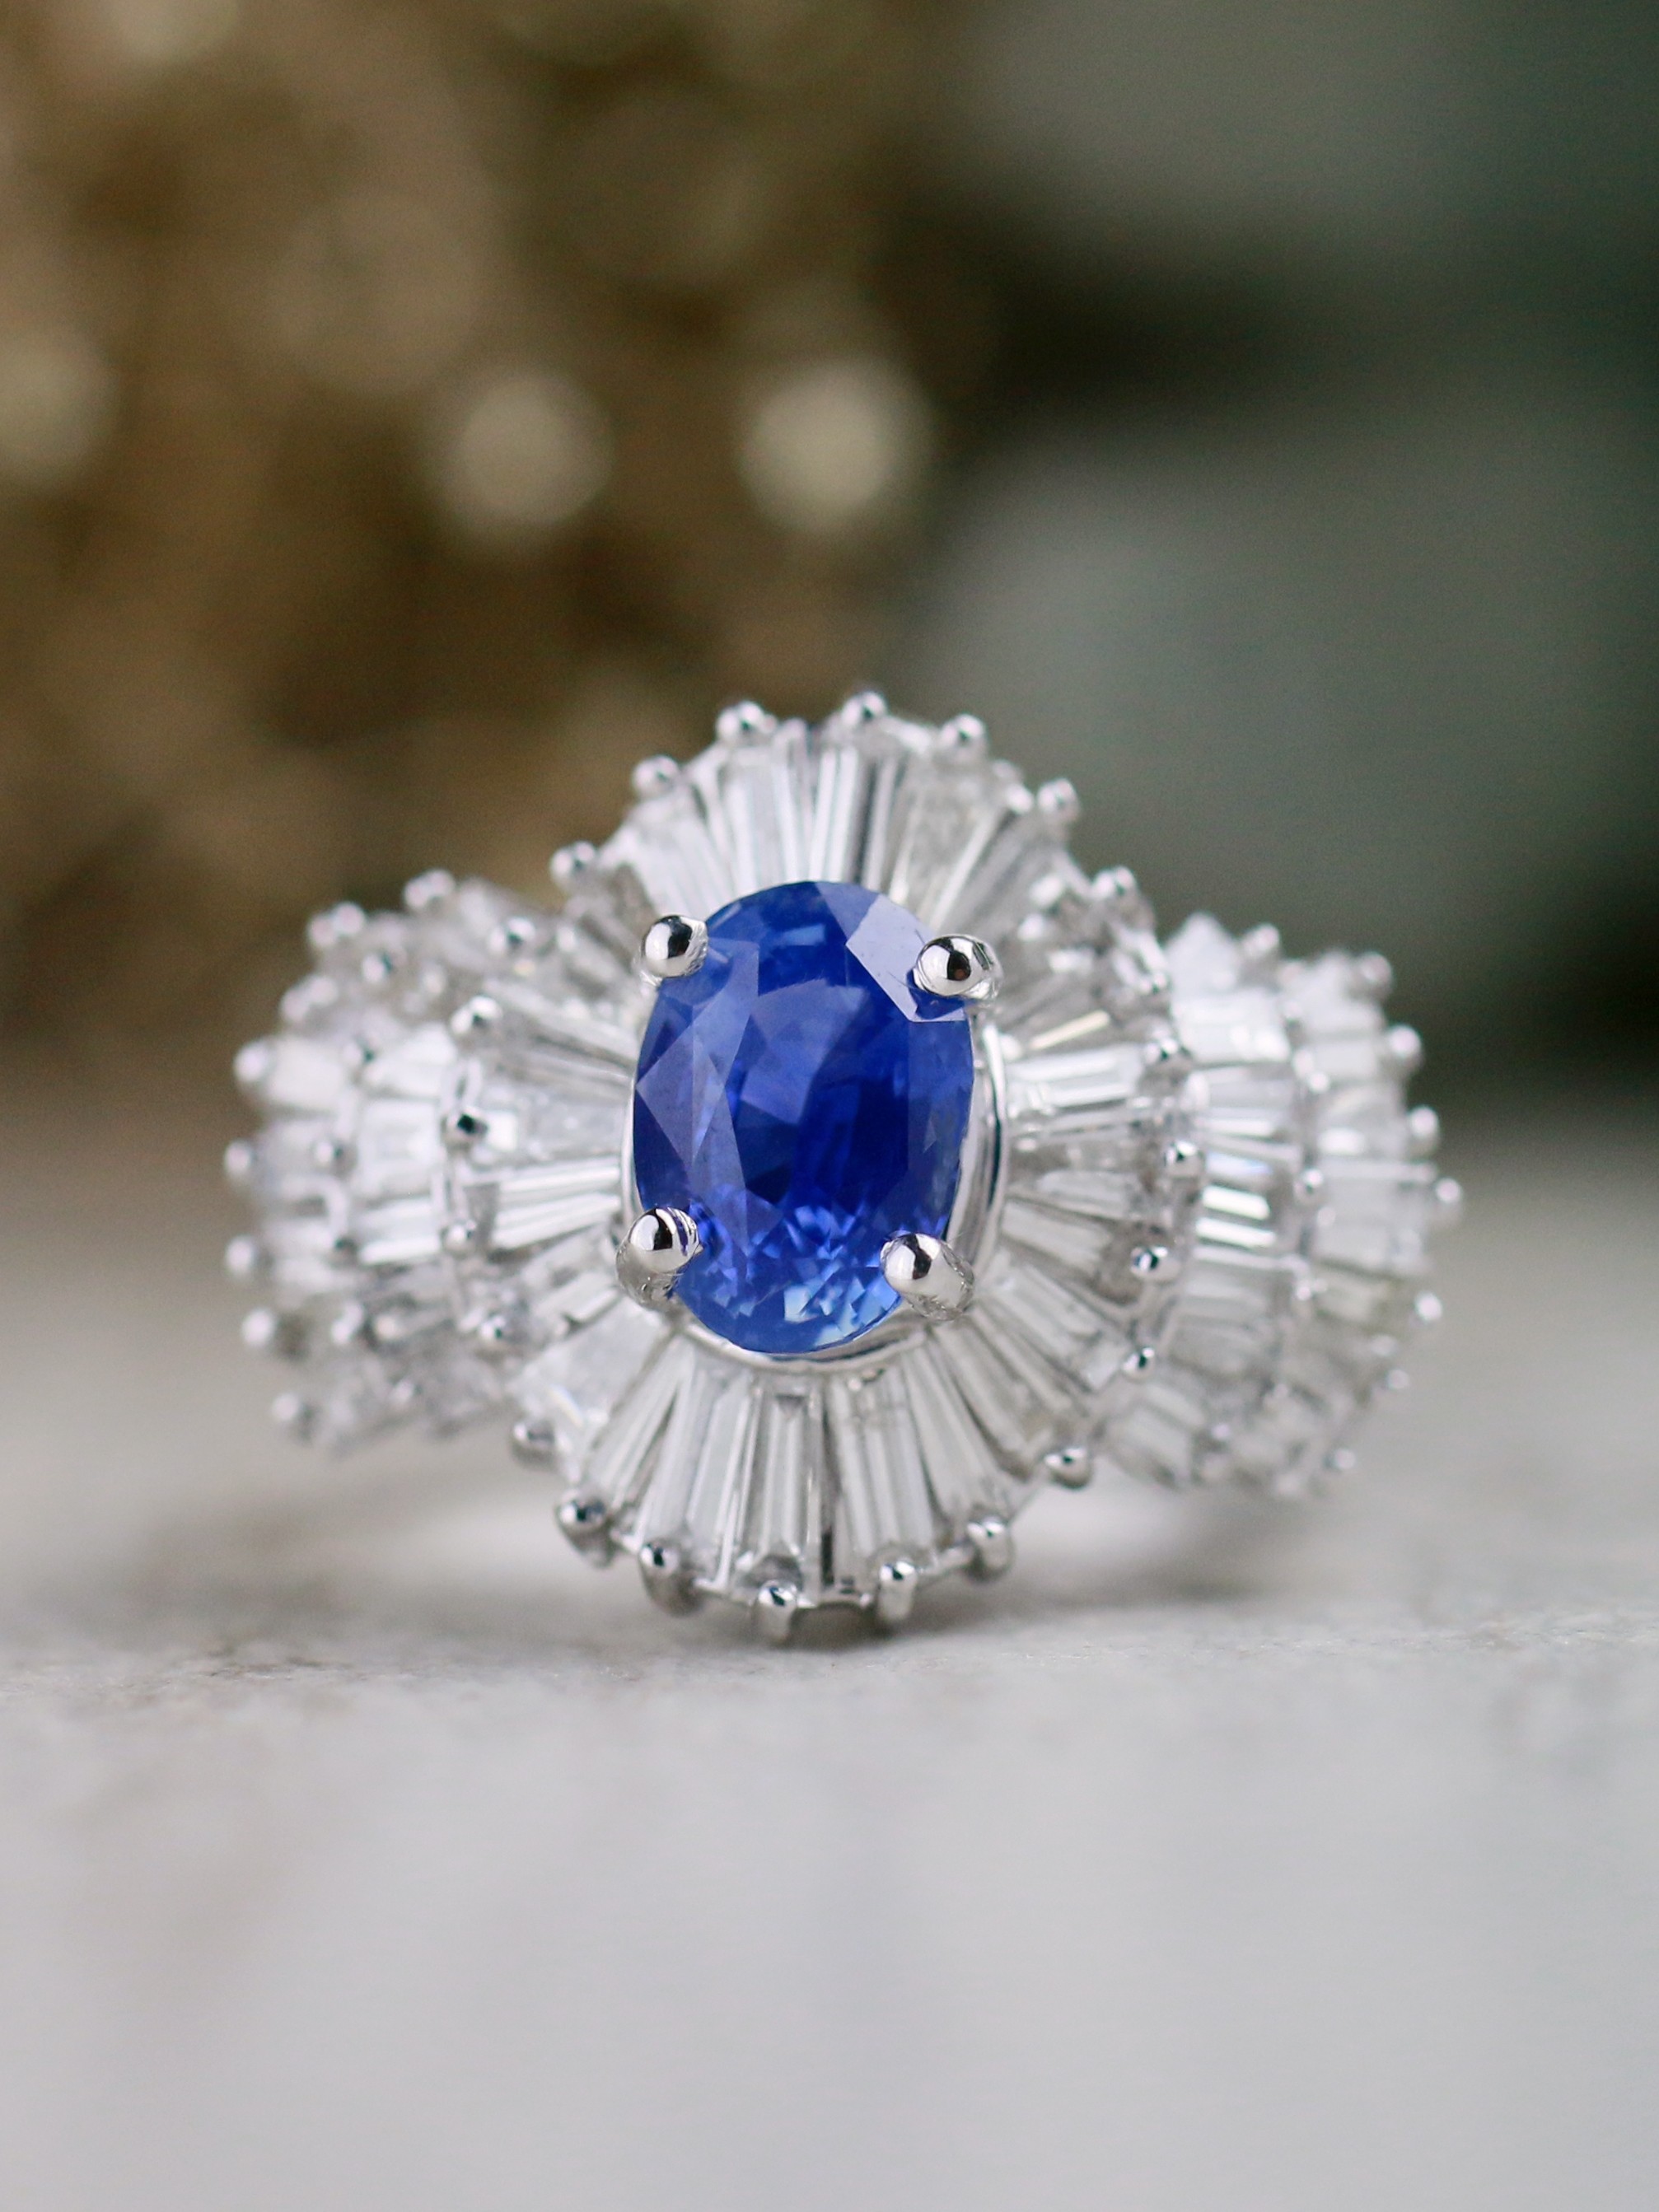 One-of-a-Kind | Blue Sapphire Ring | 2.05CT Blue Sapphire | 2.54CT Diamond | Solid 14k White Gold Ring | Estate Fine Jewelry | Free Shipping